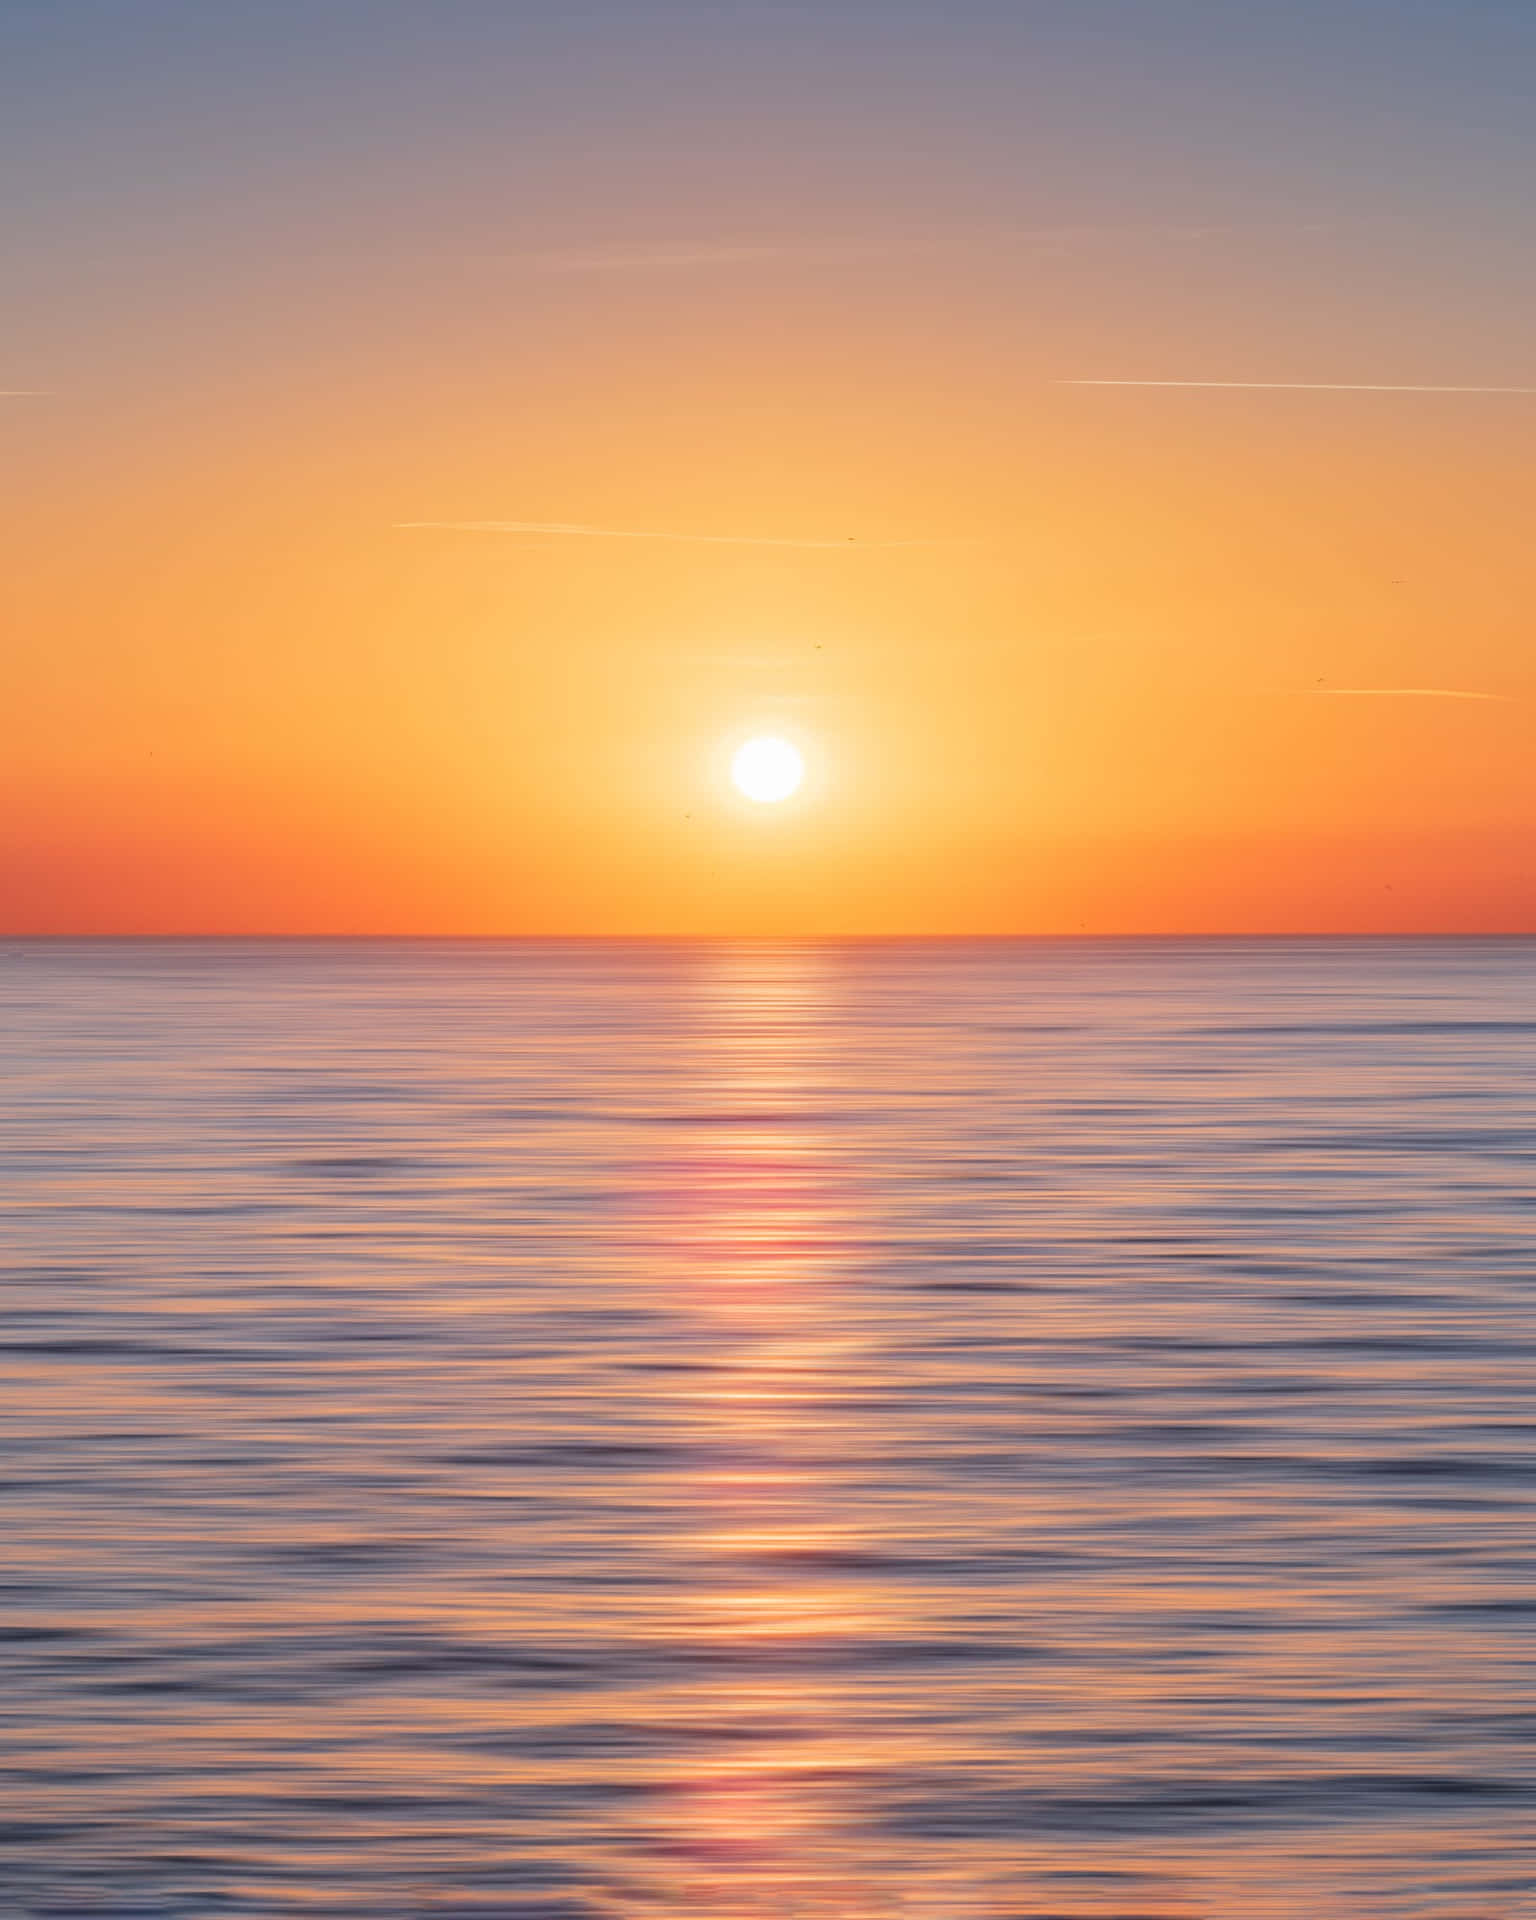 A stunningly beautiful sunset over the calm and inviting ocean. Wallpaper